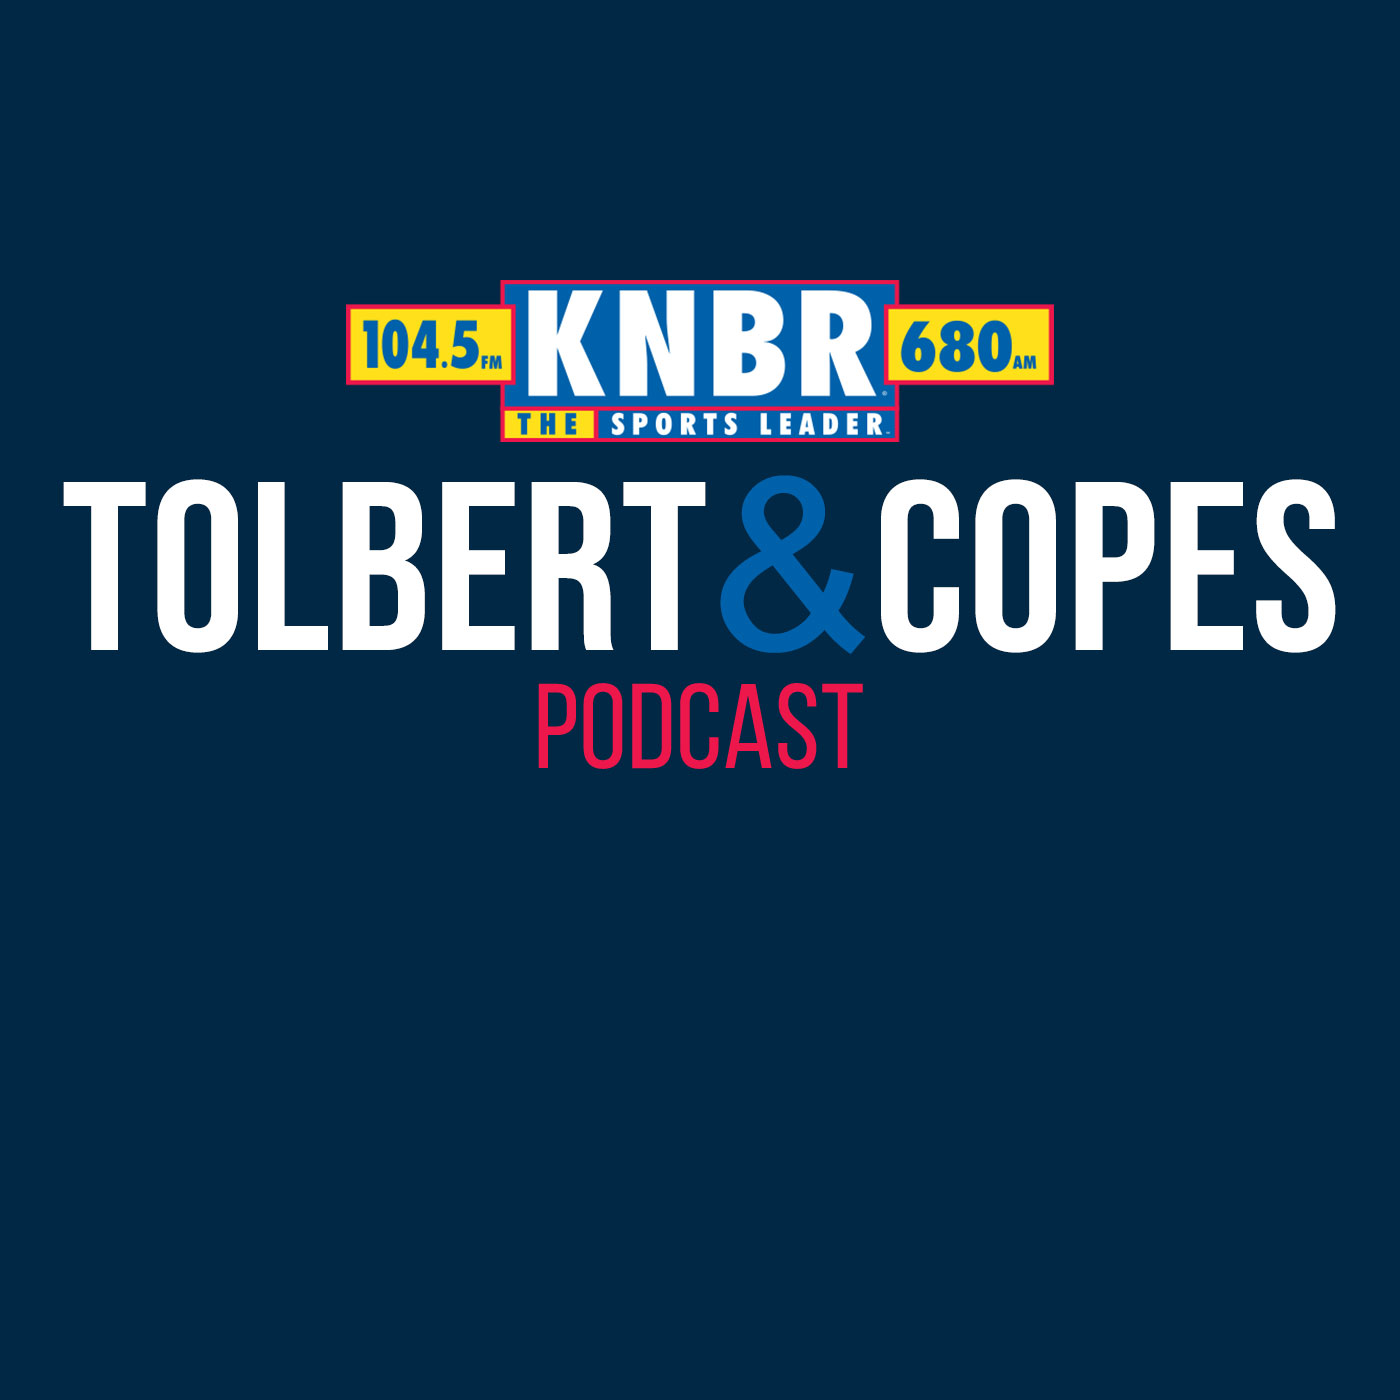 4-8 Tolbert & Copes Hour 1: What Blake Snell Brings to the Giants Tonight